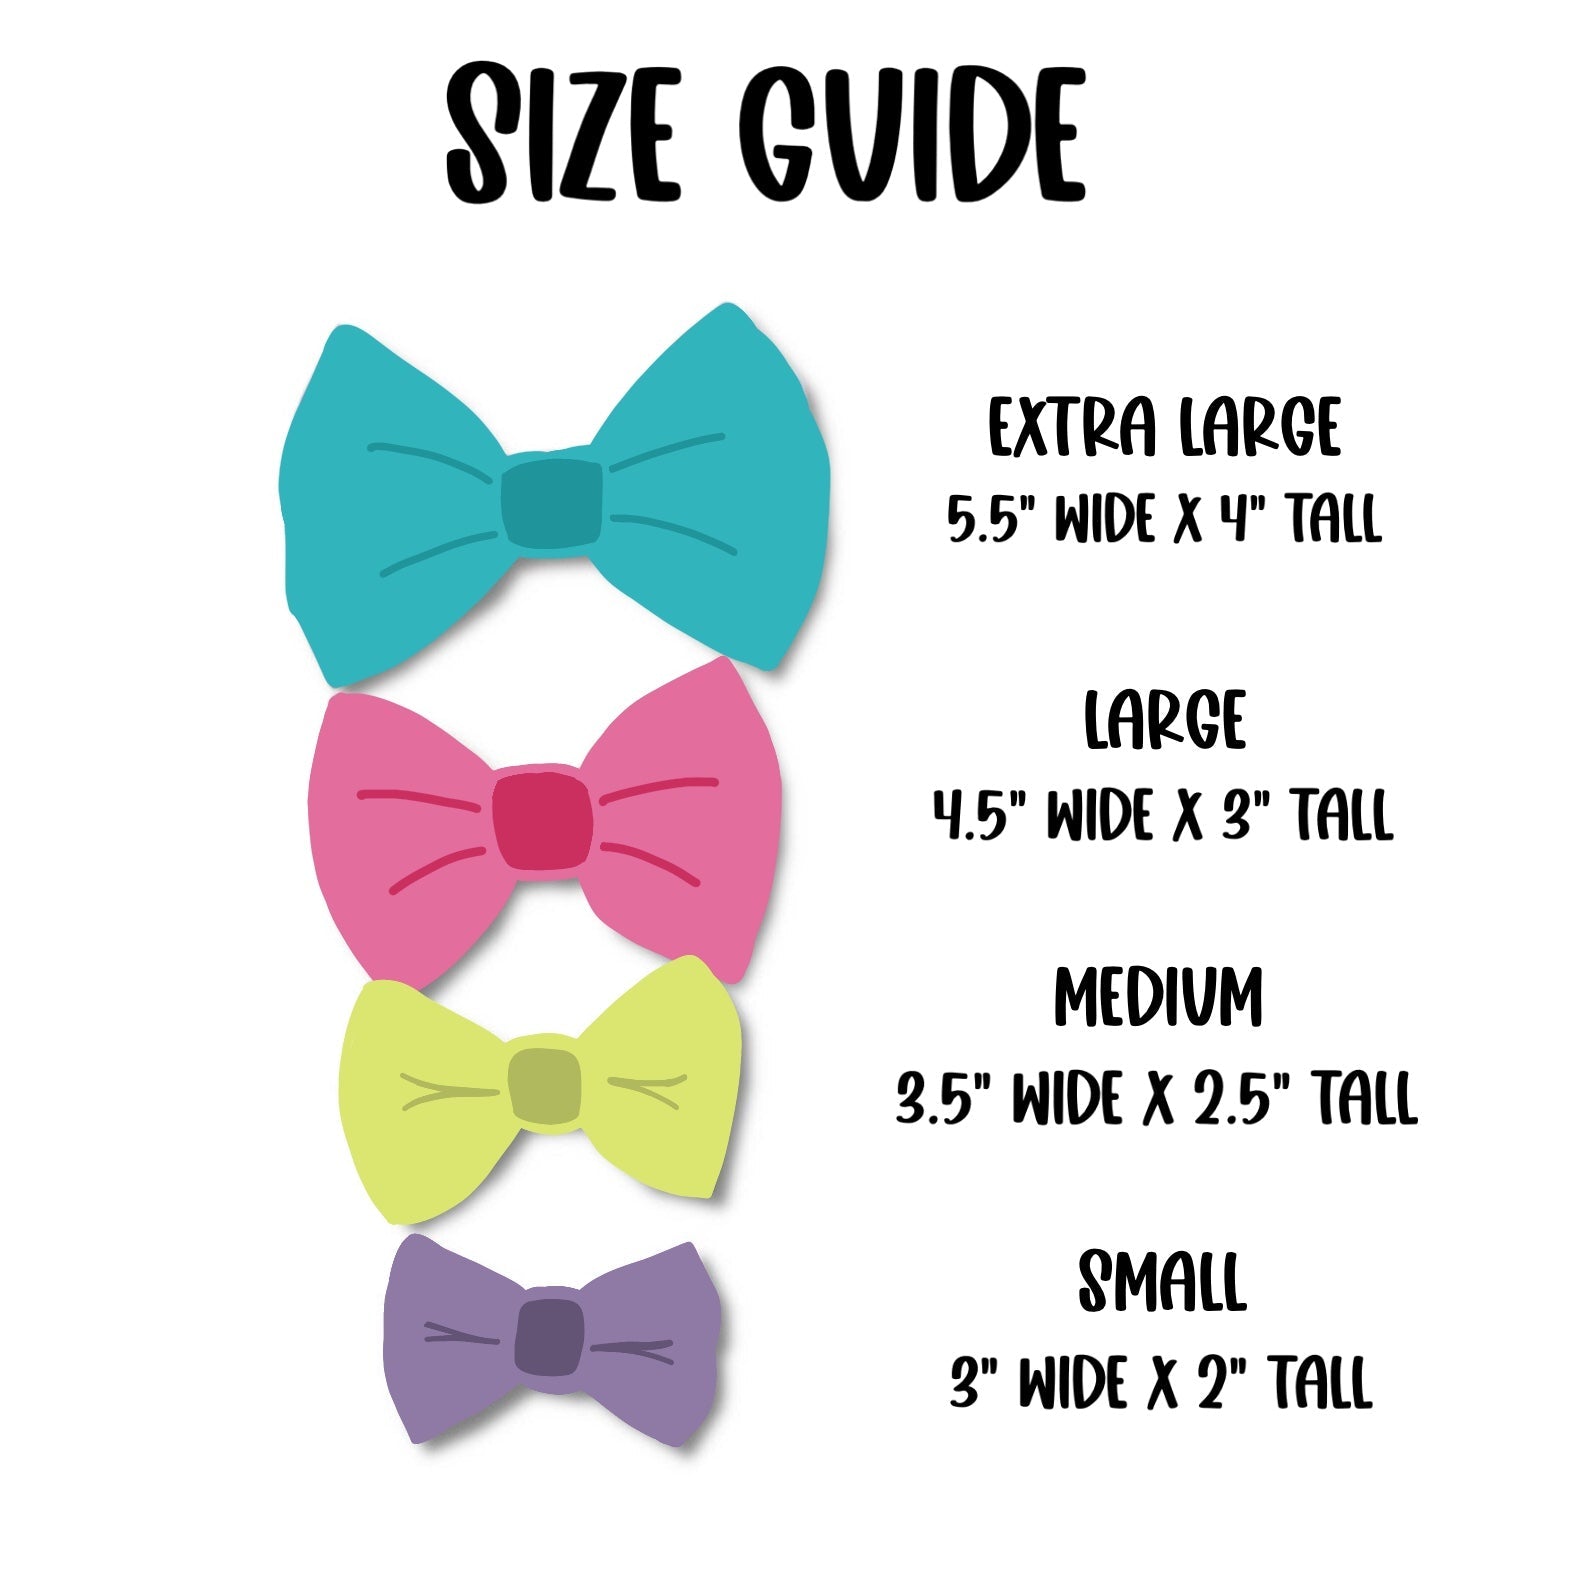 Busy Bee Bow - The Paw Pack Goods